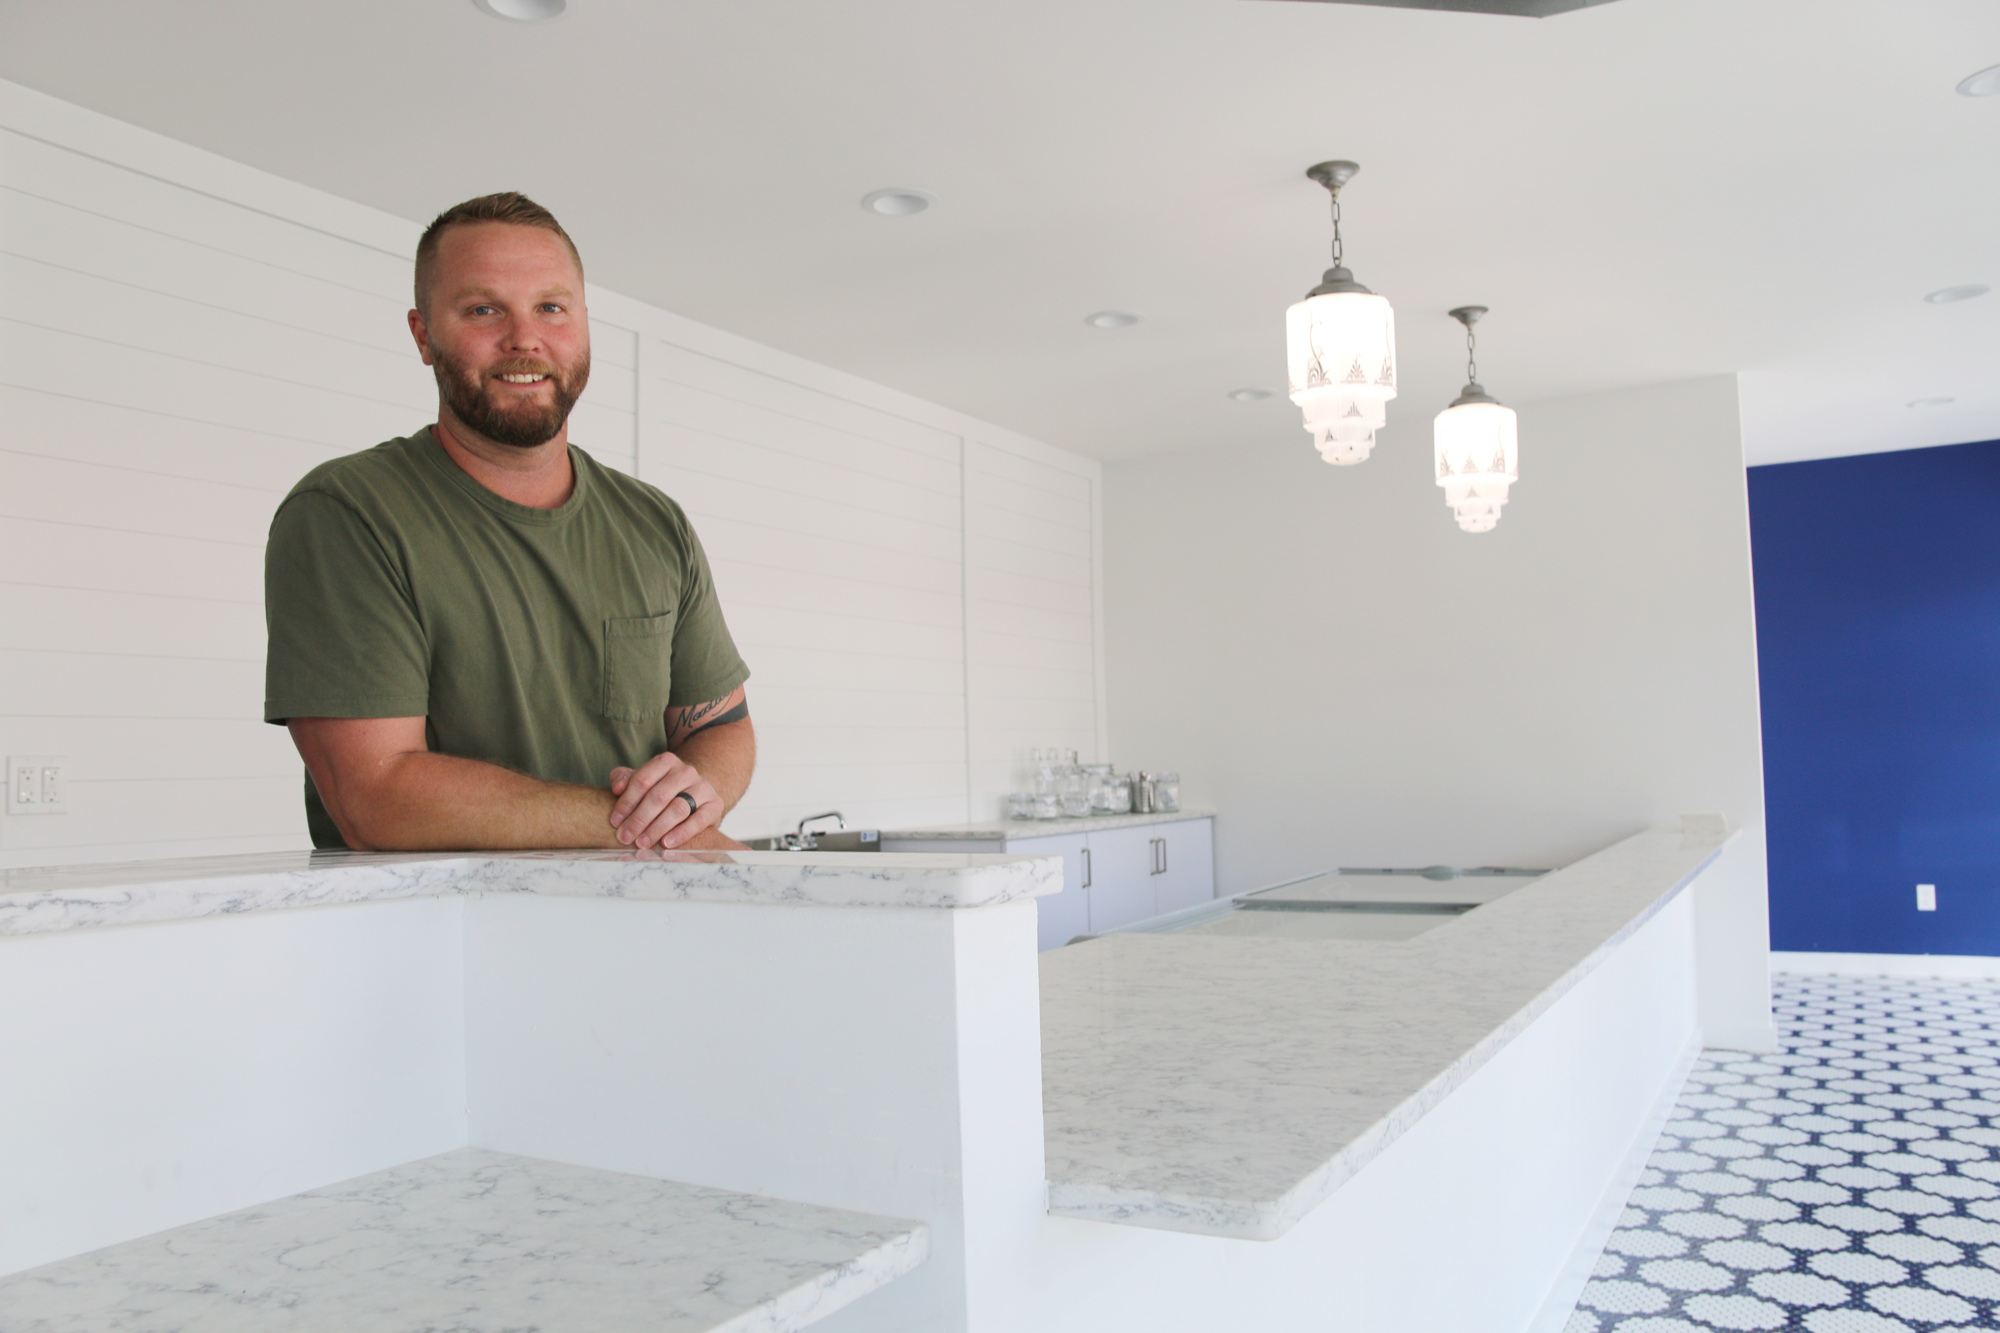 Craig Frick didn't want Neighborhood Scoop to resemble the average ice cream parlor; he wanted less pastels, and more trendy colors and fixtures. Photo by Jarleene Almenas